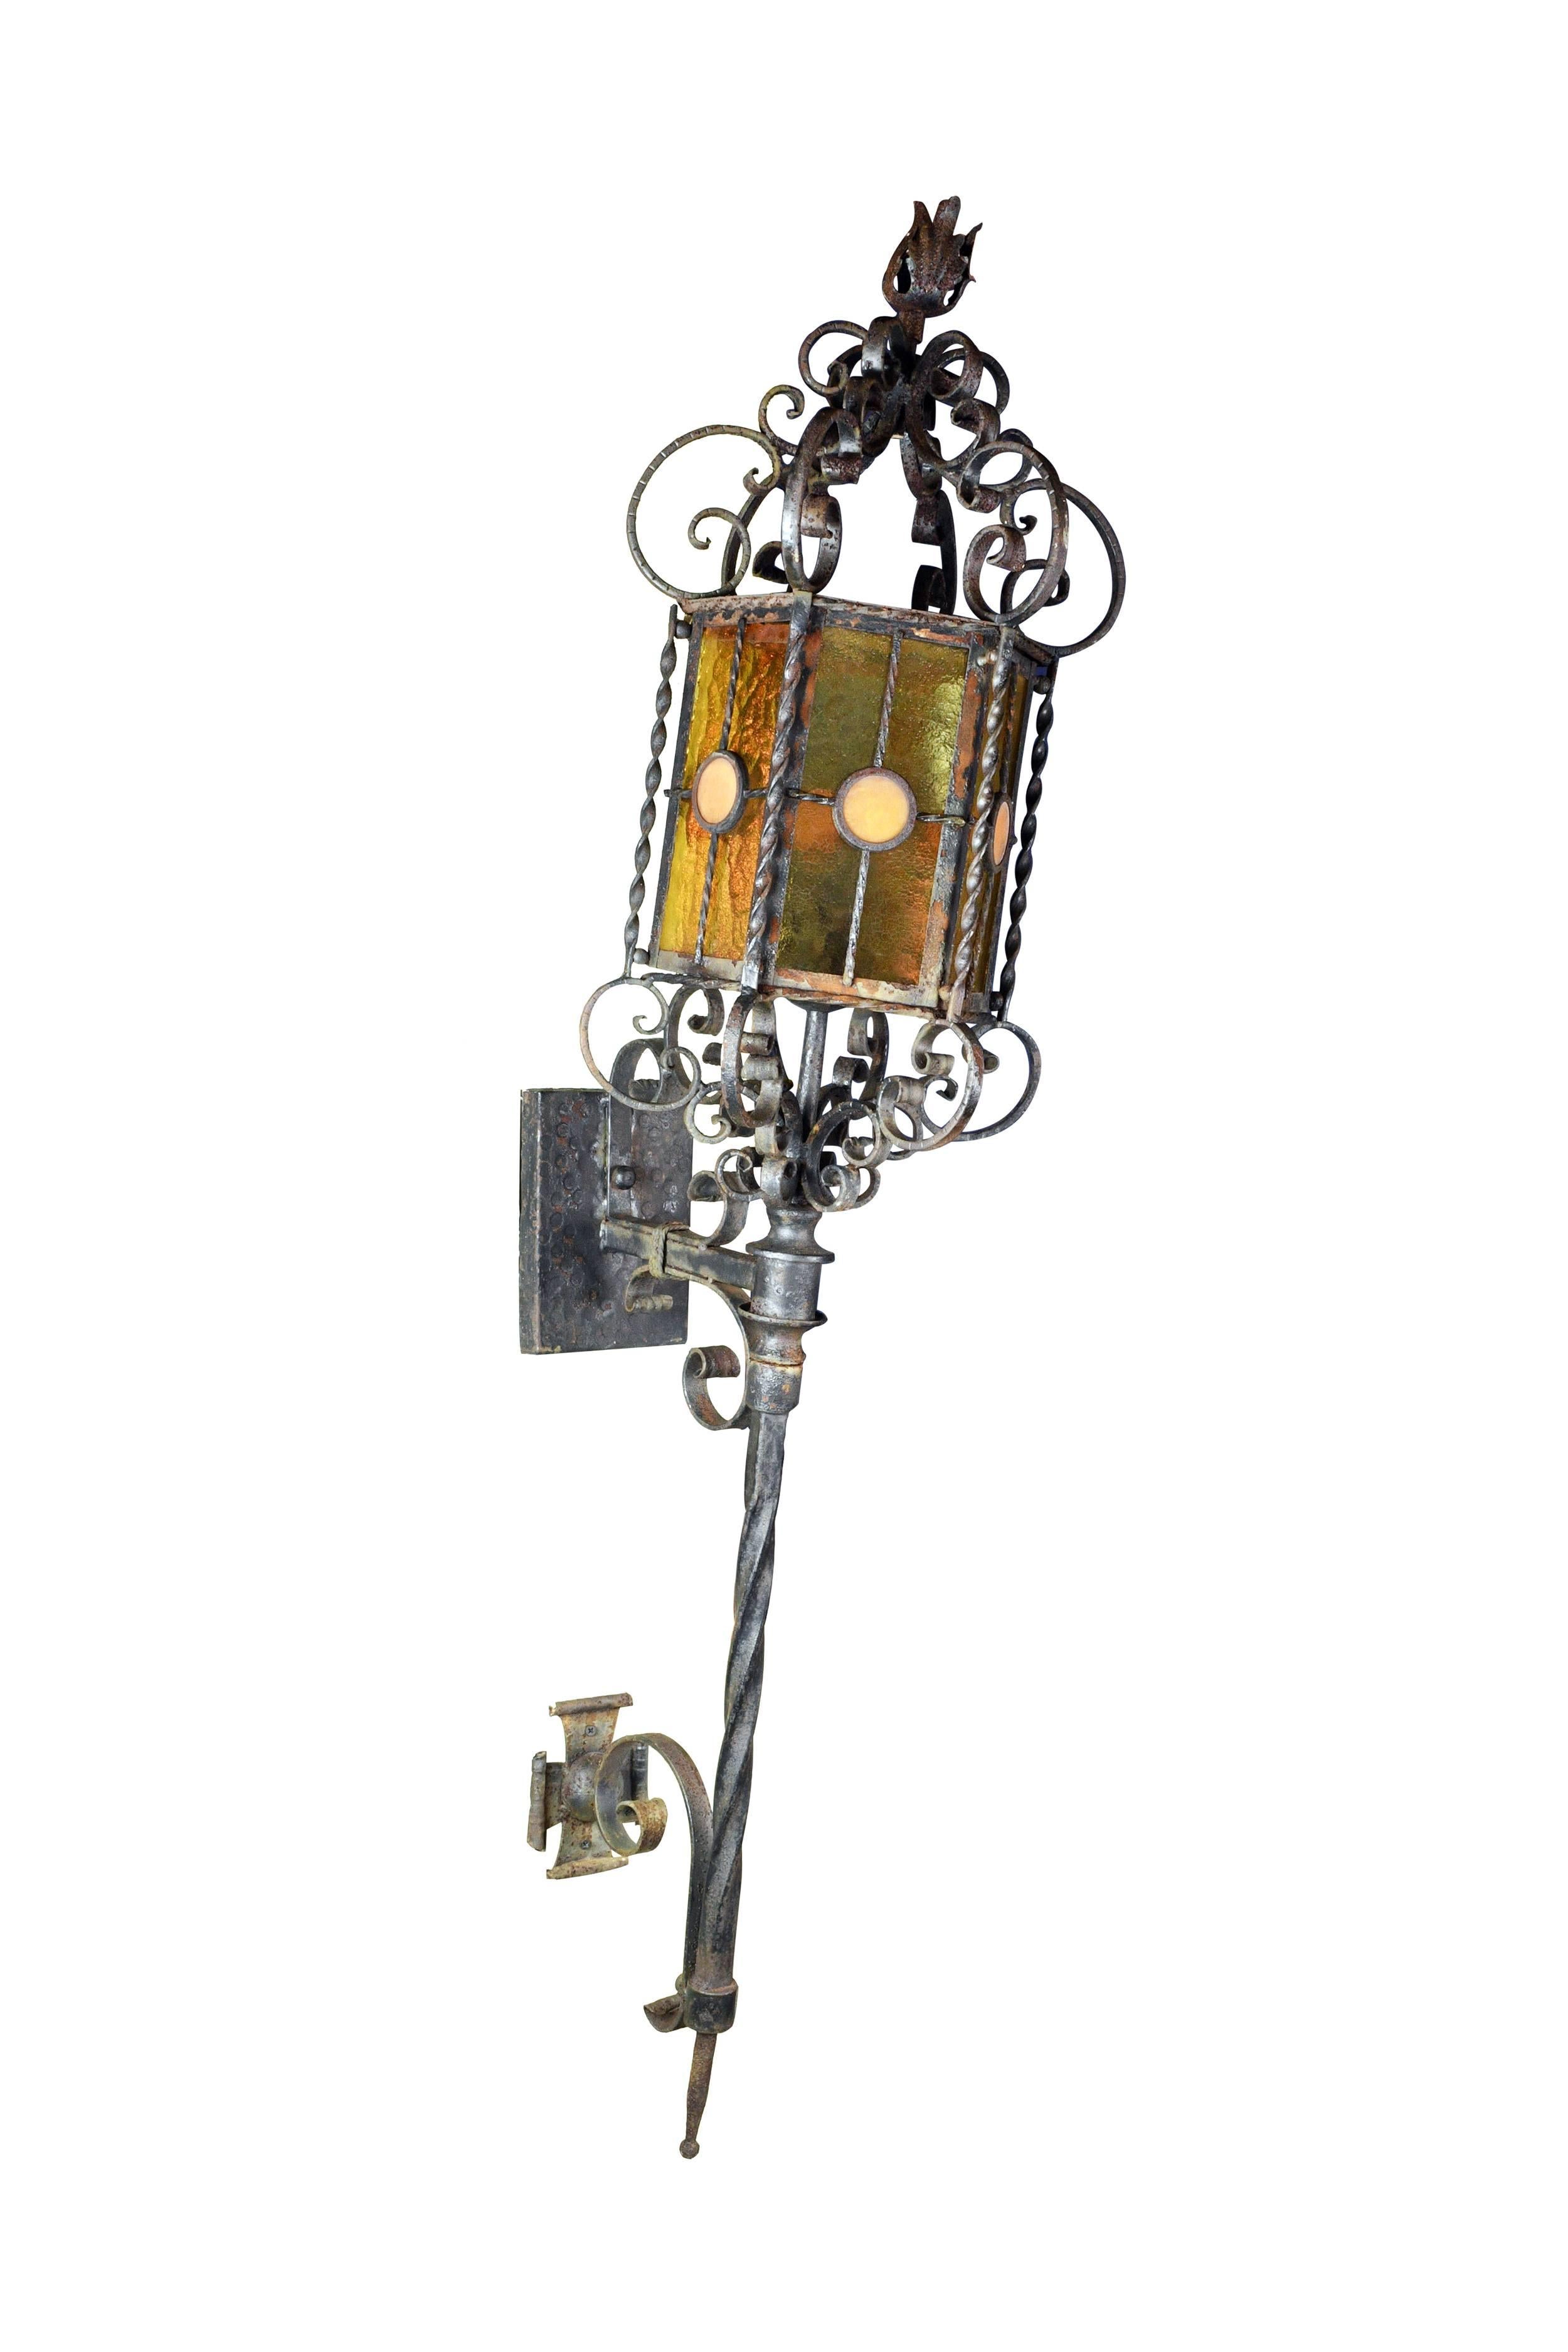 This large-scale exterior Italianate iron lantern sconce is highly decorative with curving lines that flow throughout the fixture. The glass shade is warm in tone, which works well with the cool metal body. The fixture, rather than sitting